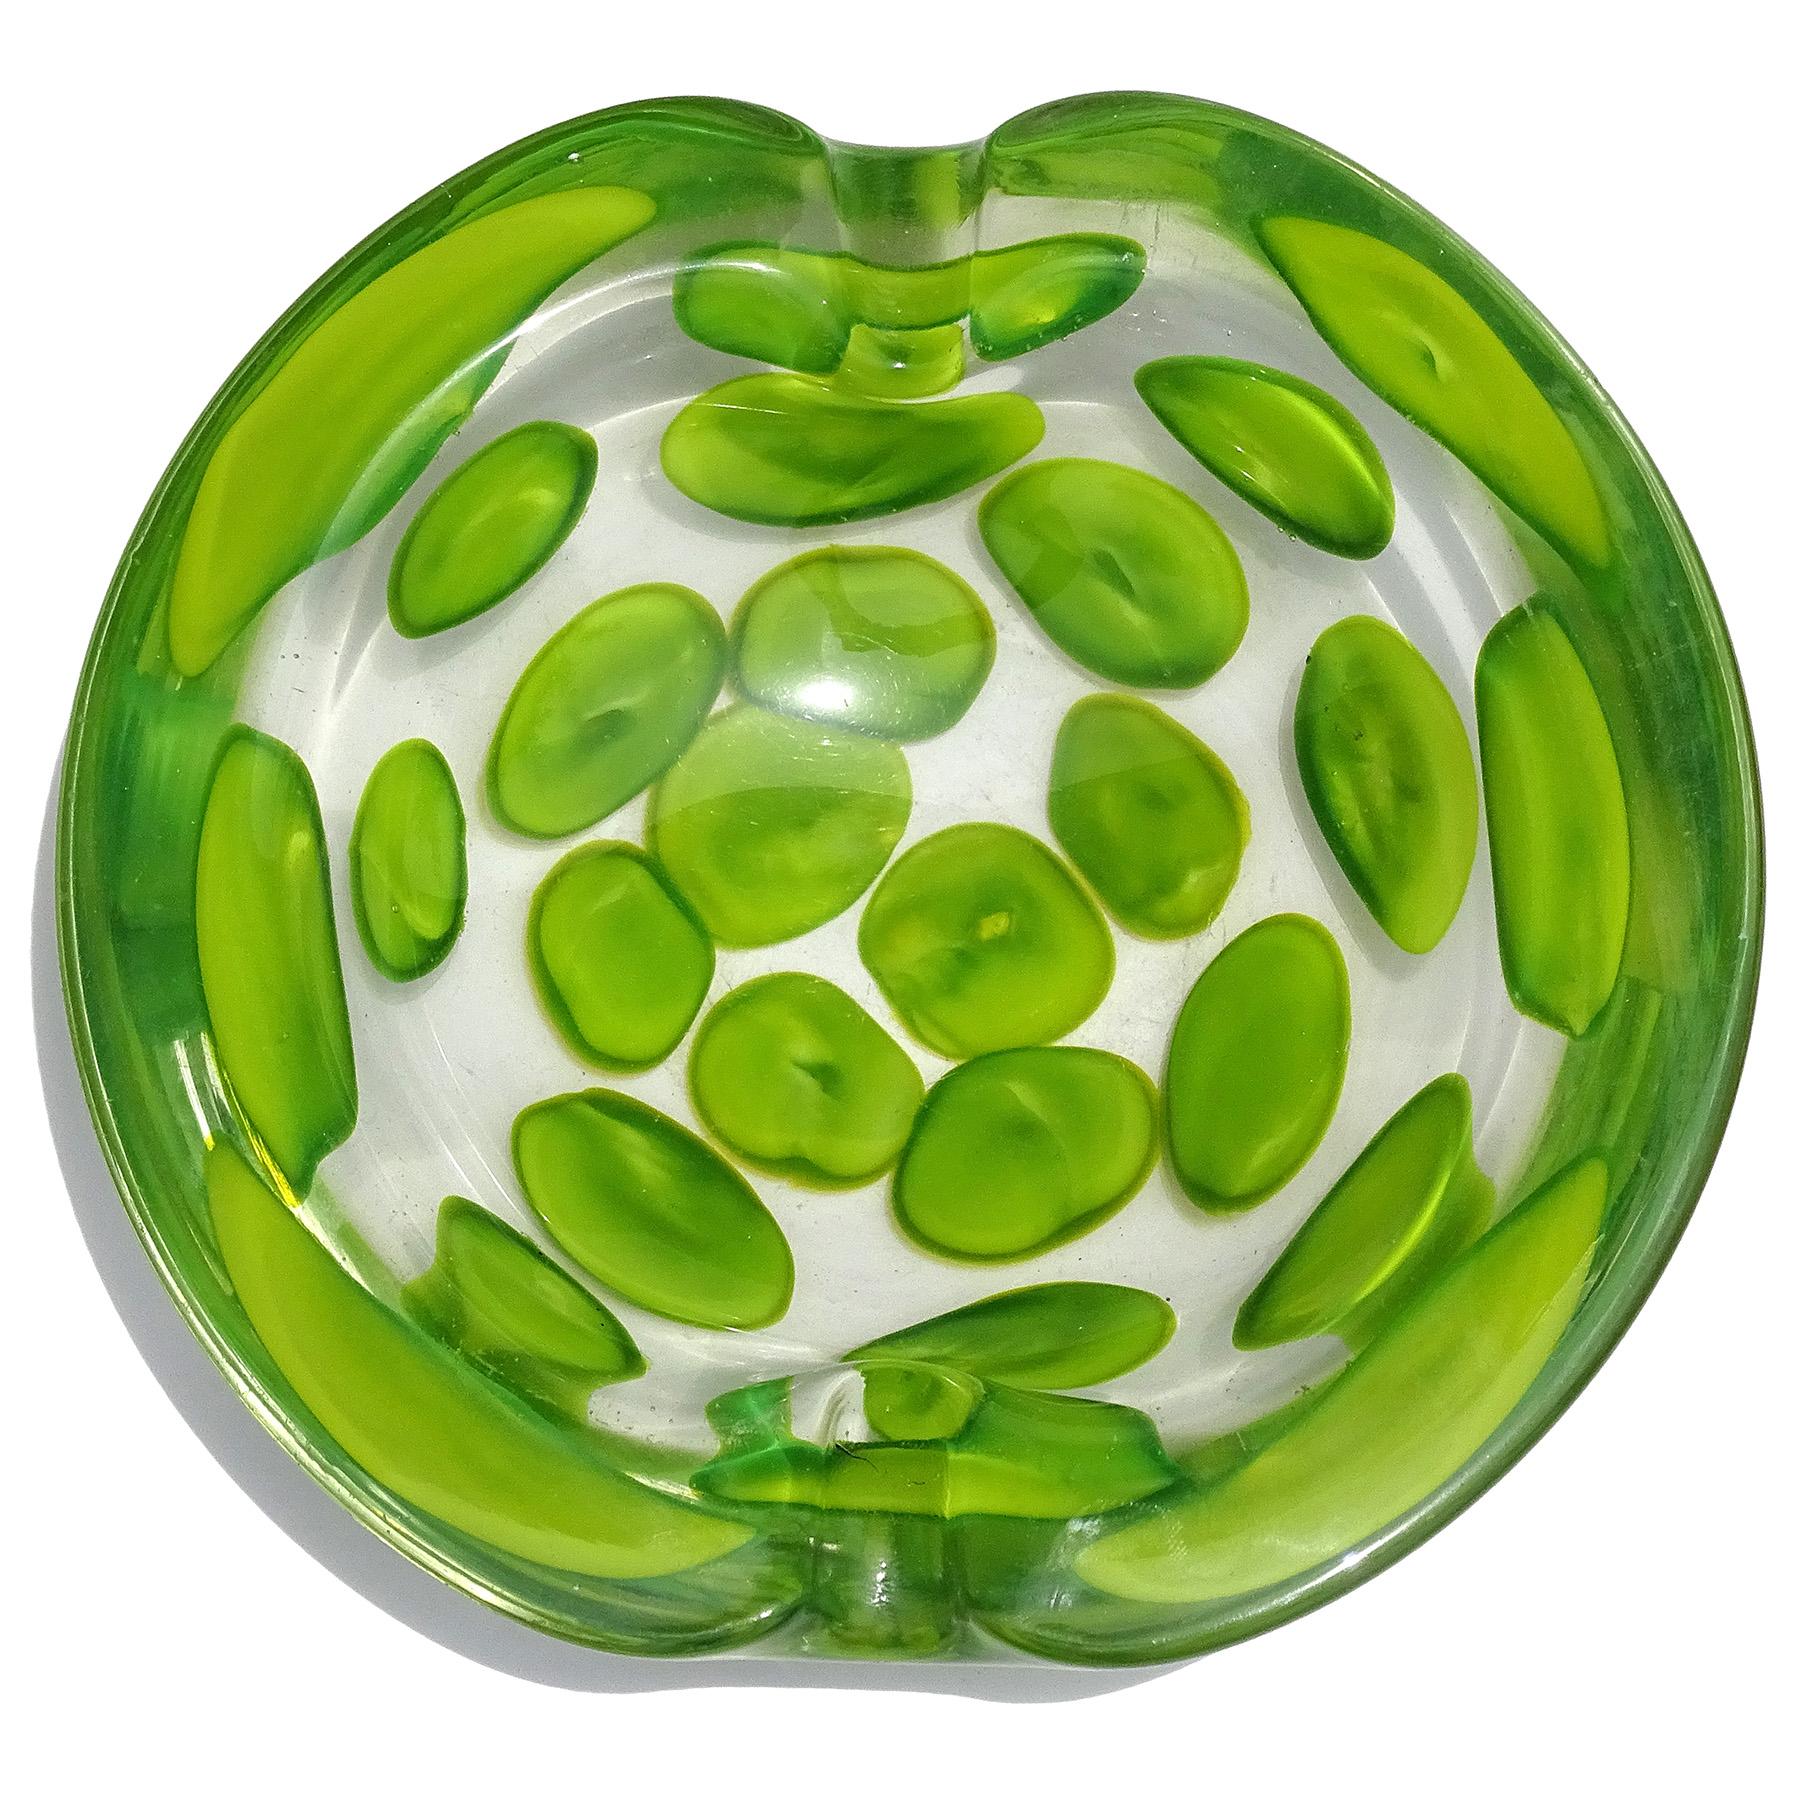 Beautiful and very rare Murano hand blown apple green spots Italian art glass decorative bowl or ashtray. Documented to designer Ermanno Toso for the Fratelli Toso company, circa 1962. Published design is in the Fratelli Toso book. The technique /